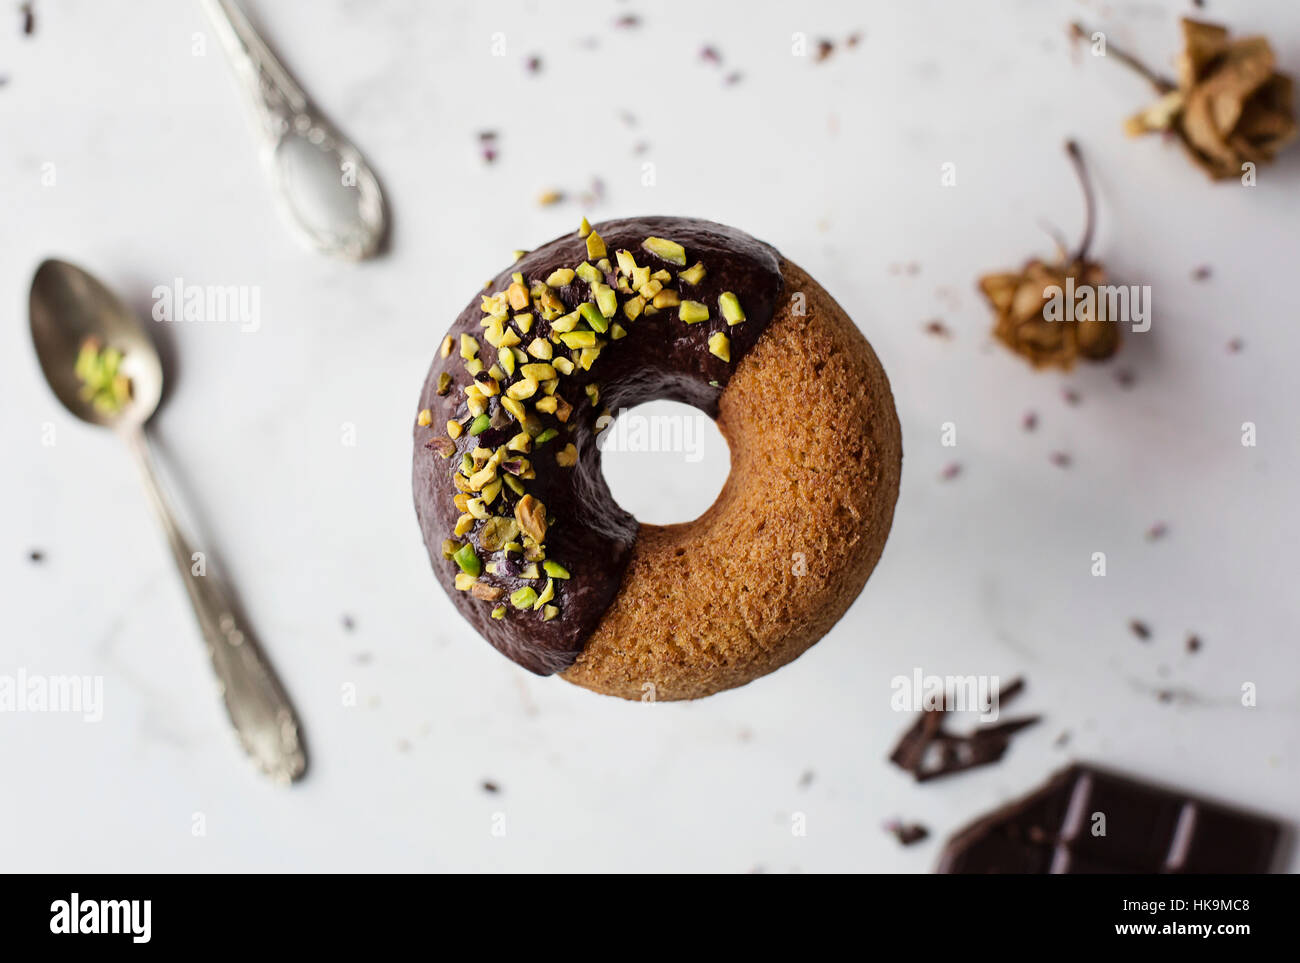 Donut with chocolate and pistachios on marble table Stock Photo